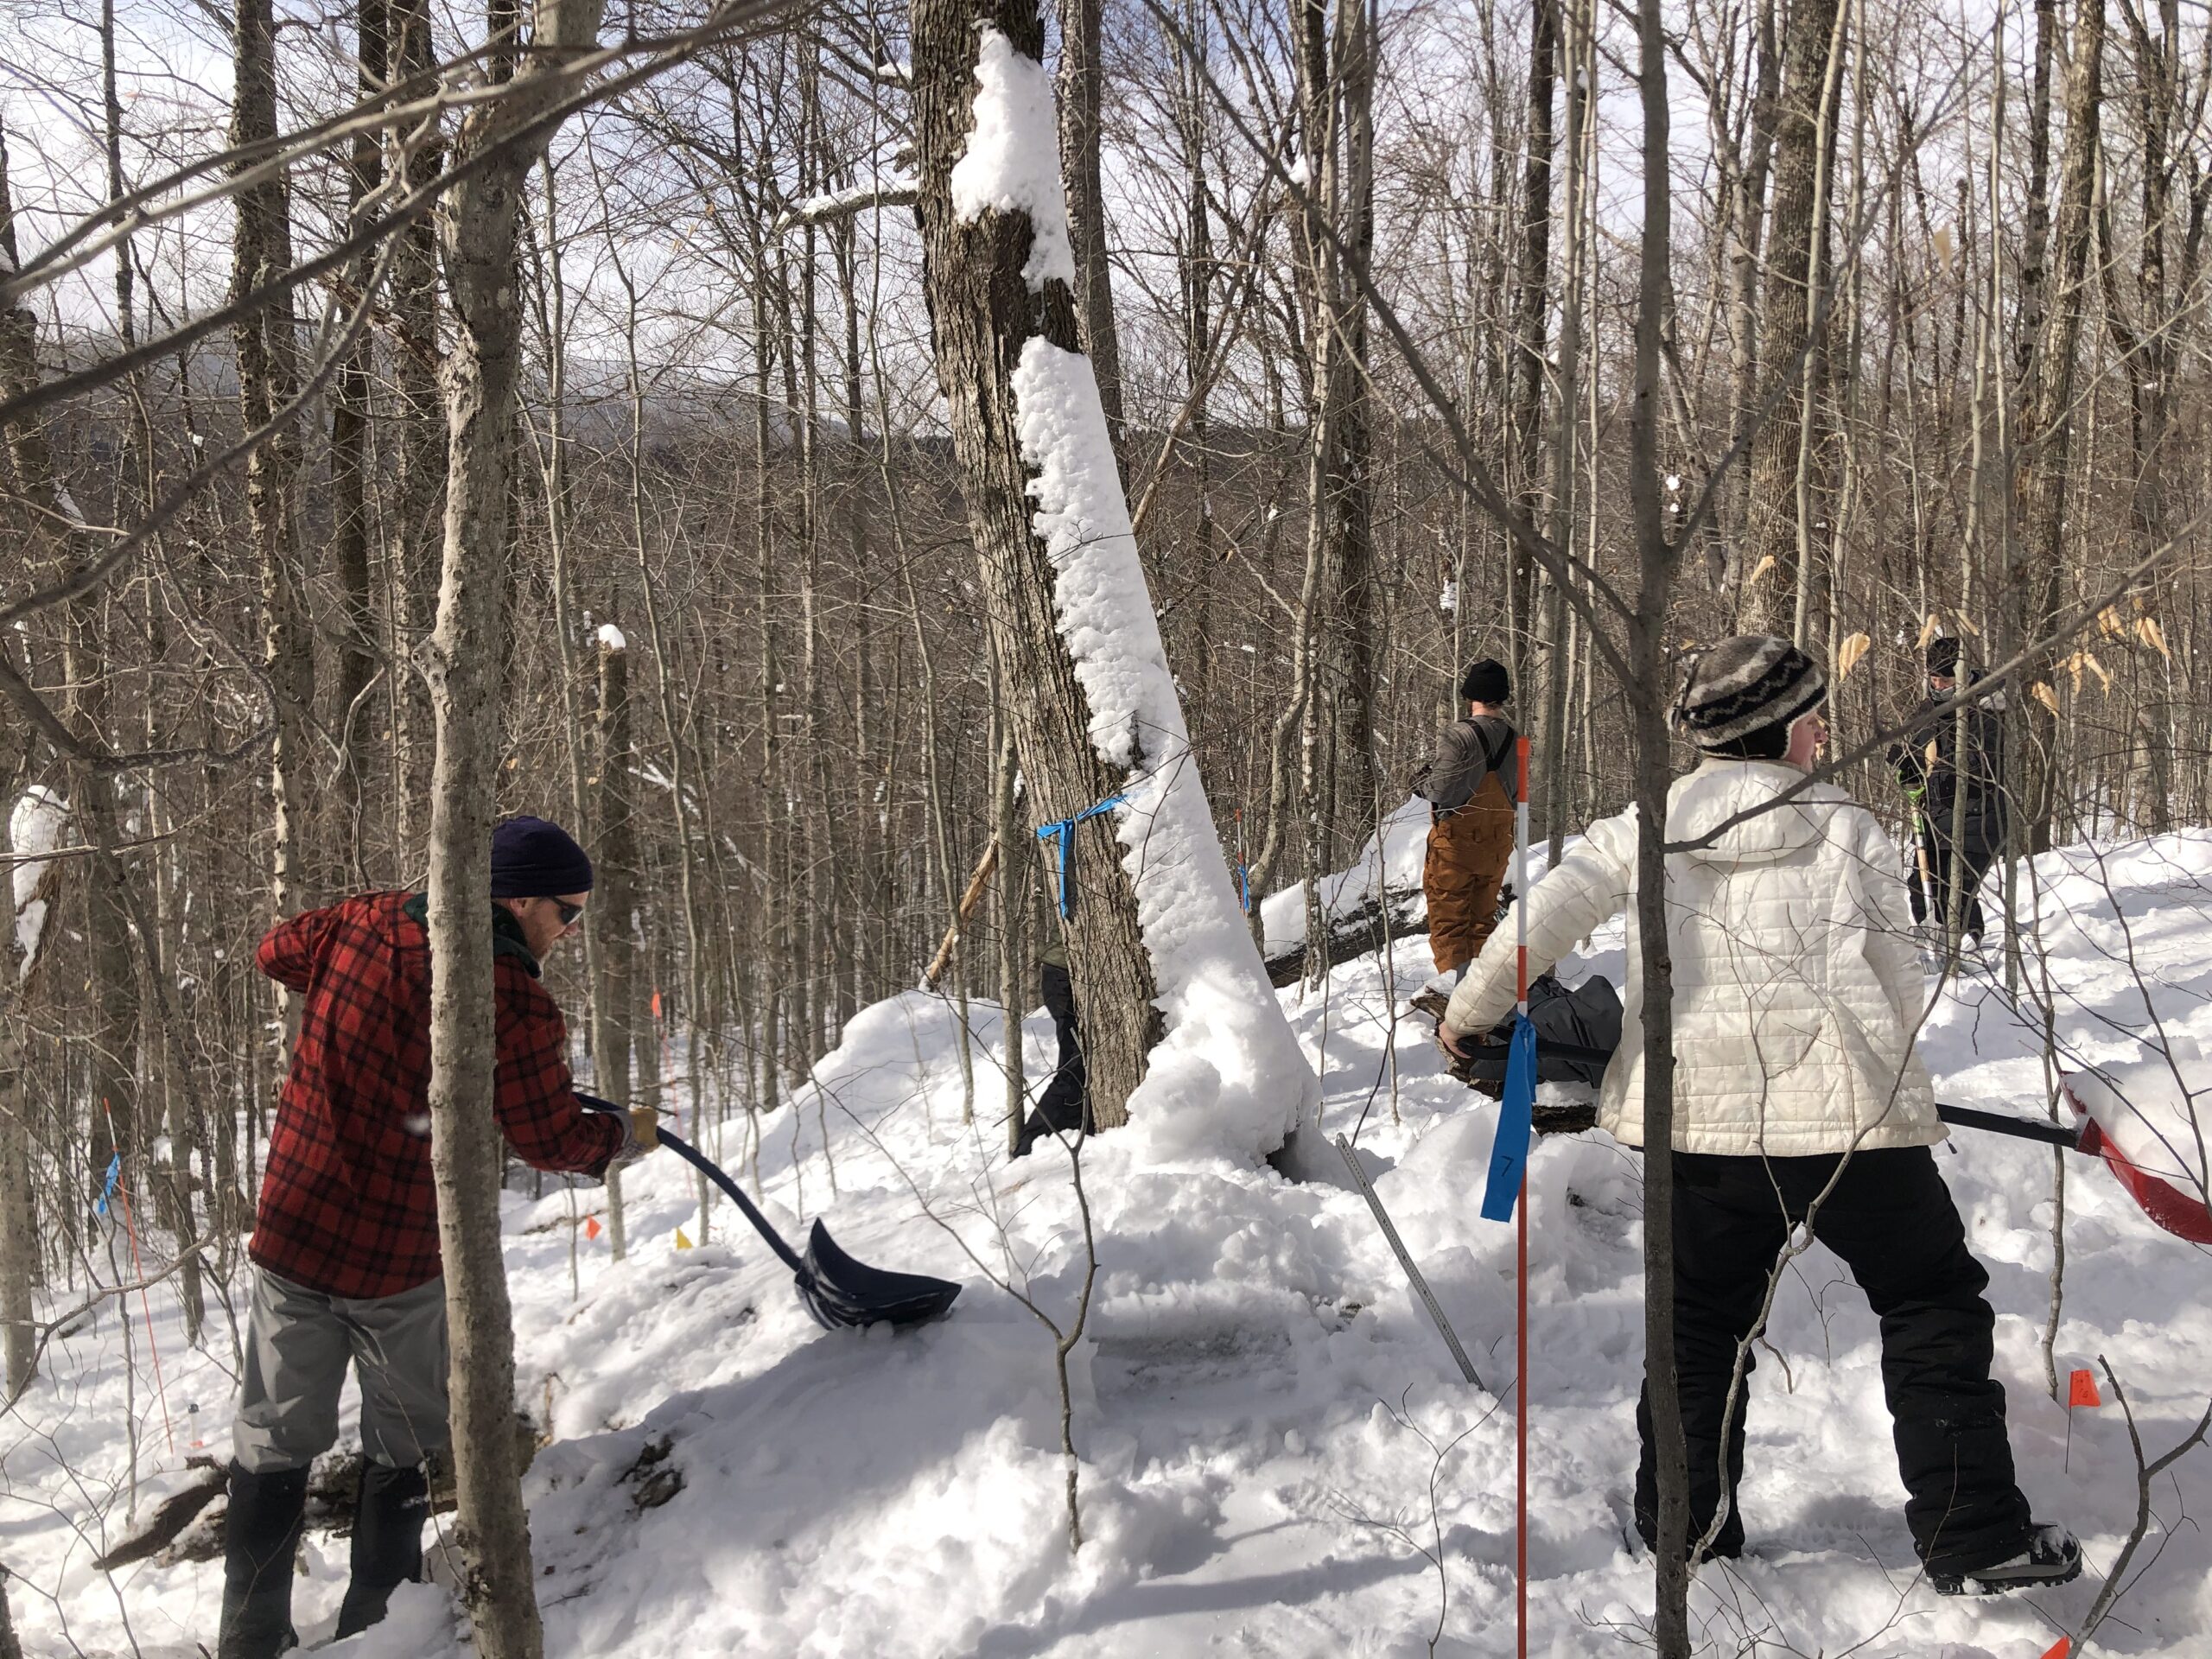 While you were shoveling the driveway they were shoveling in the woods – for science!